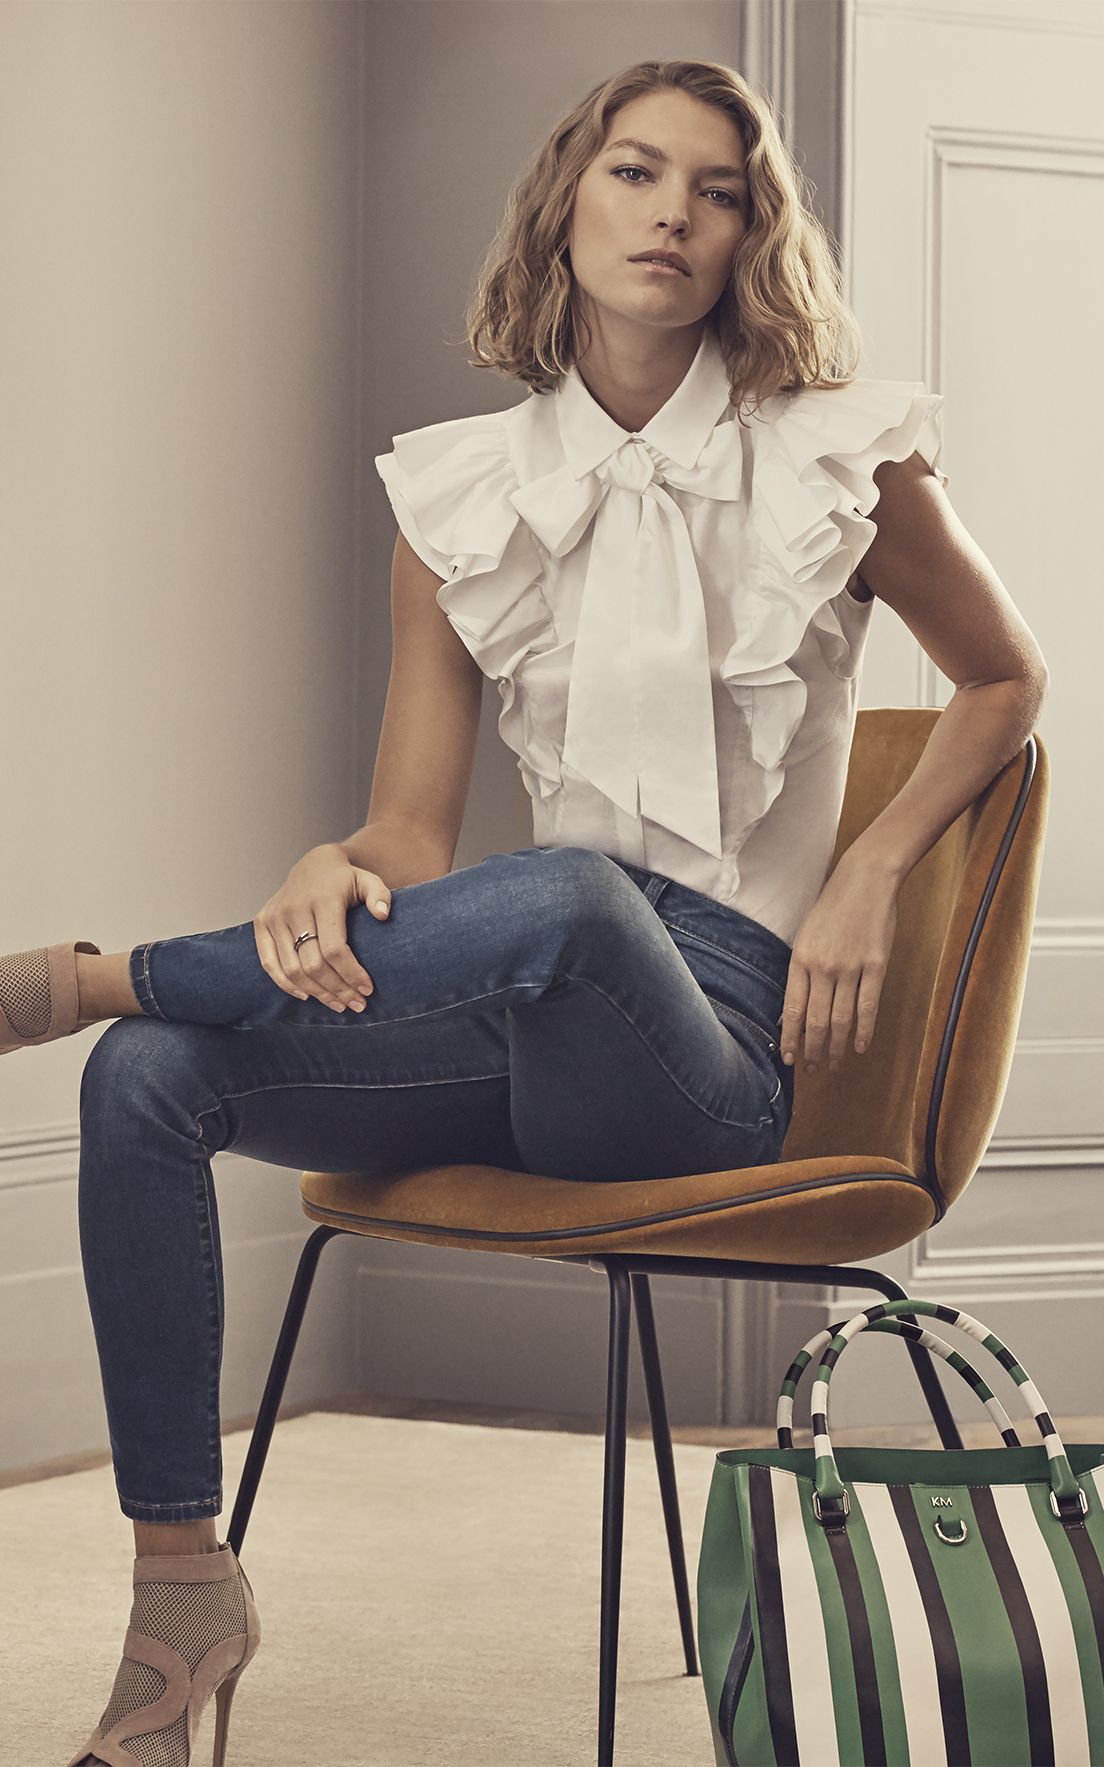 How to Style Ruffle Shirt: 15 Super Chic Looks for Women